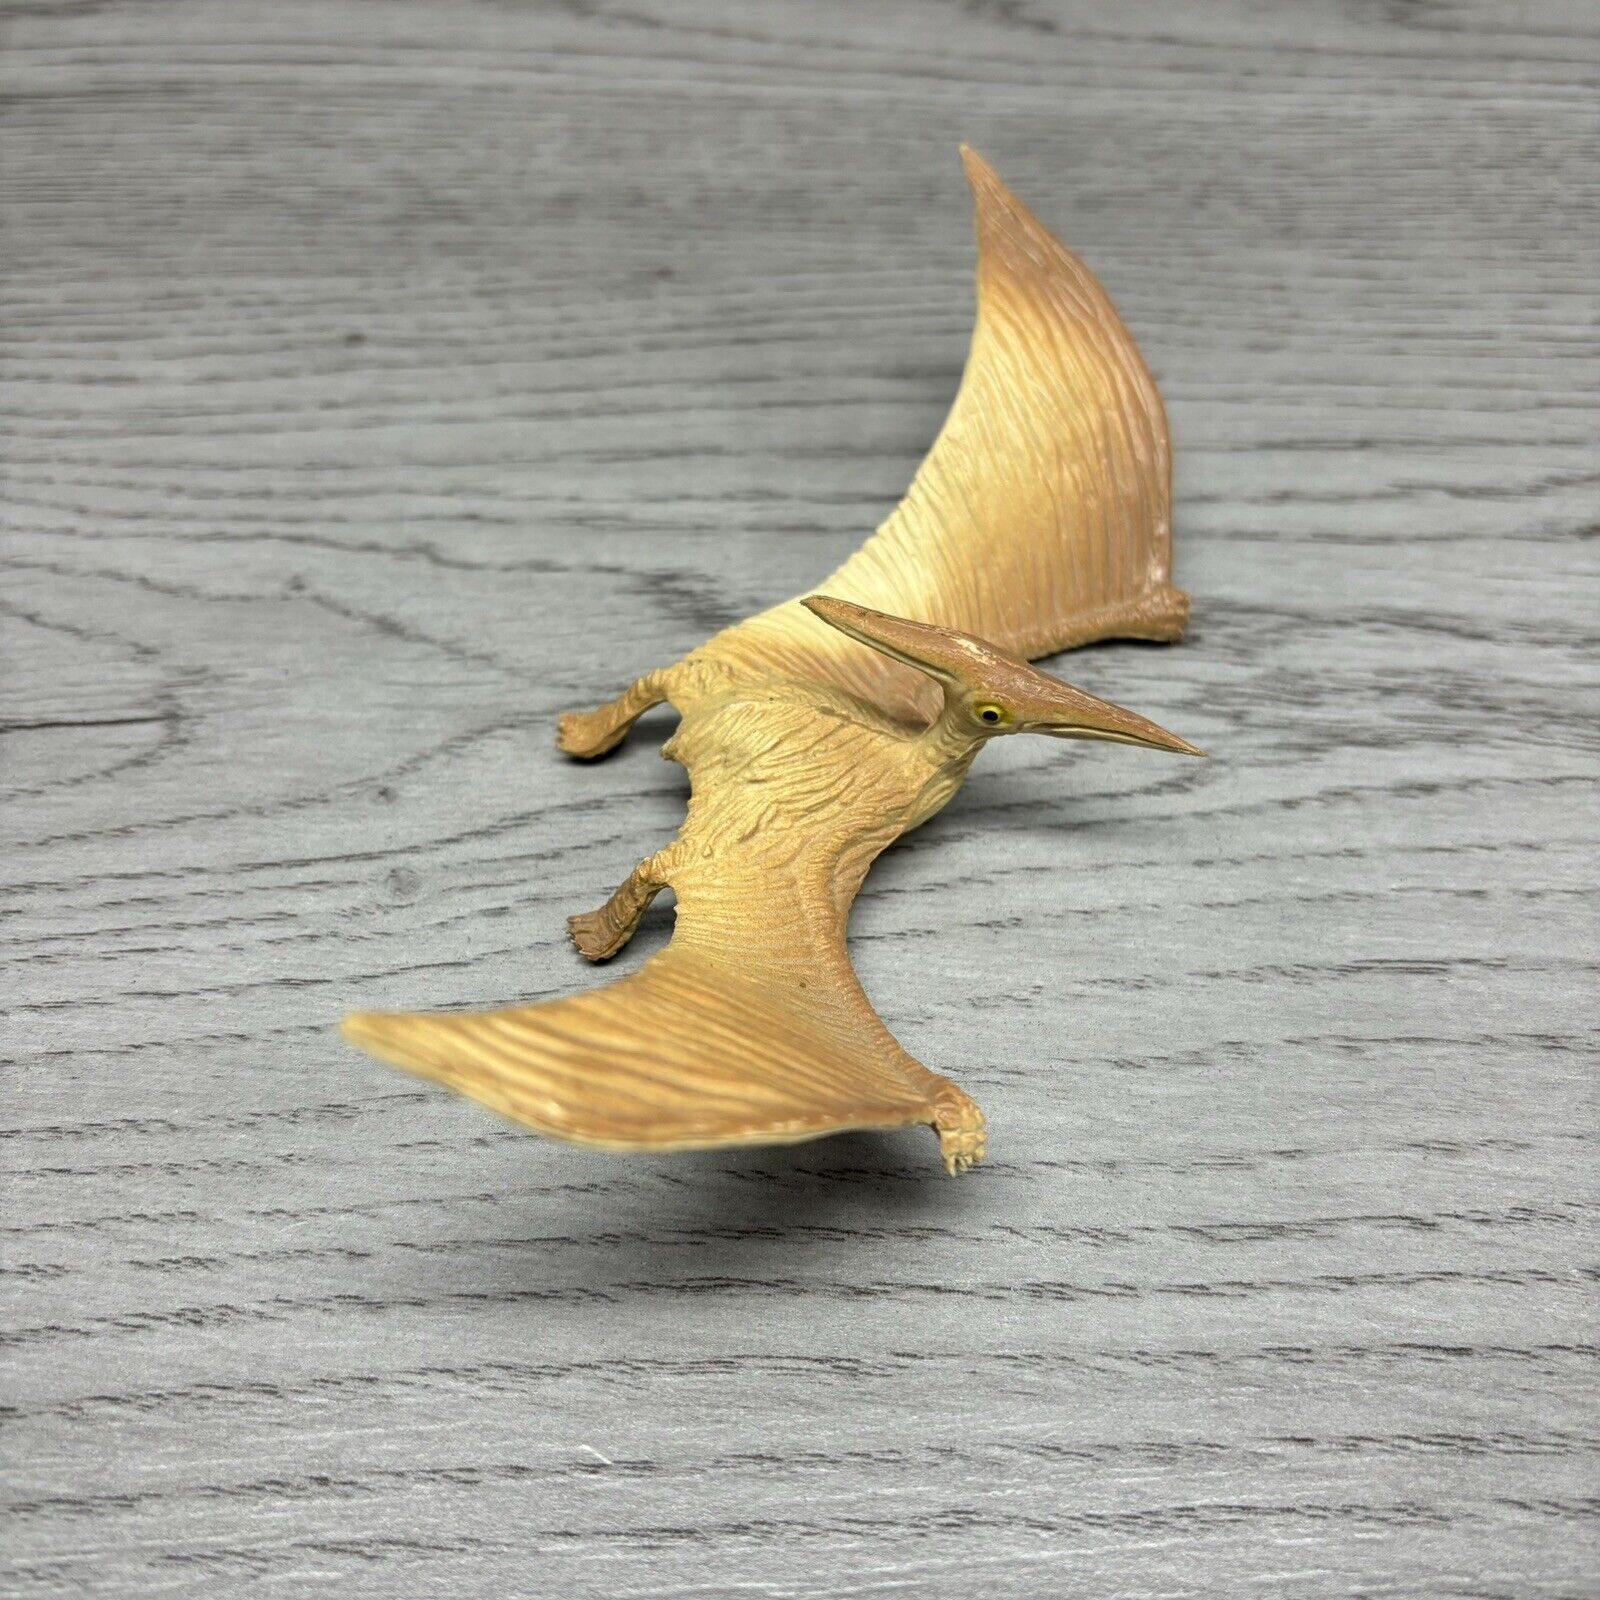 Larami Dinosaur Pteranodon Flying Toy Action Figure Vtg 1980s 1990s Collectable